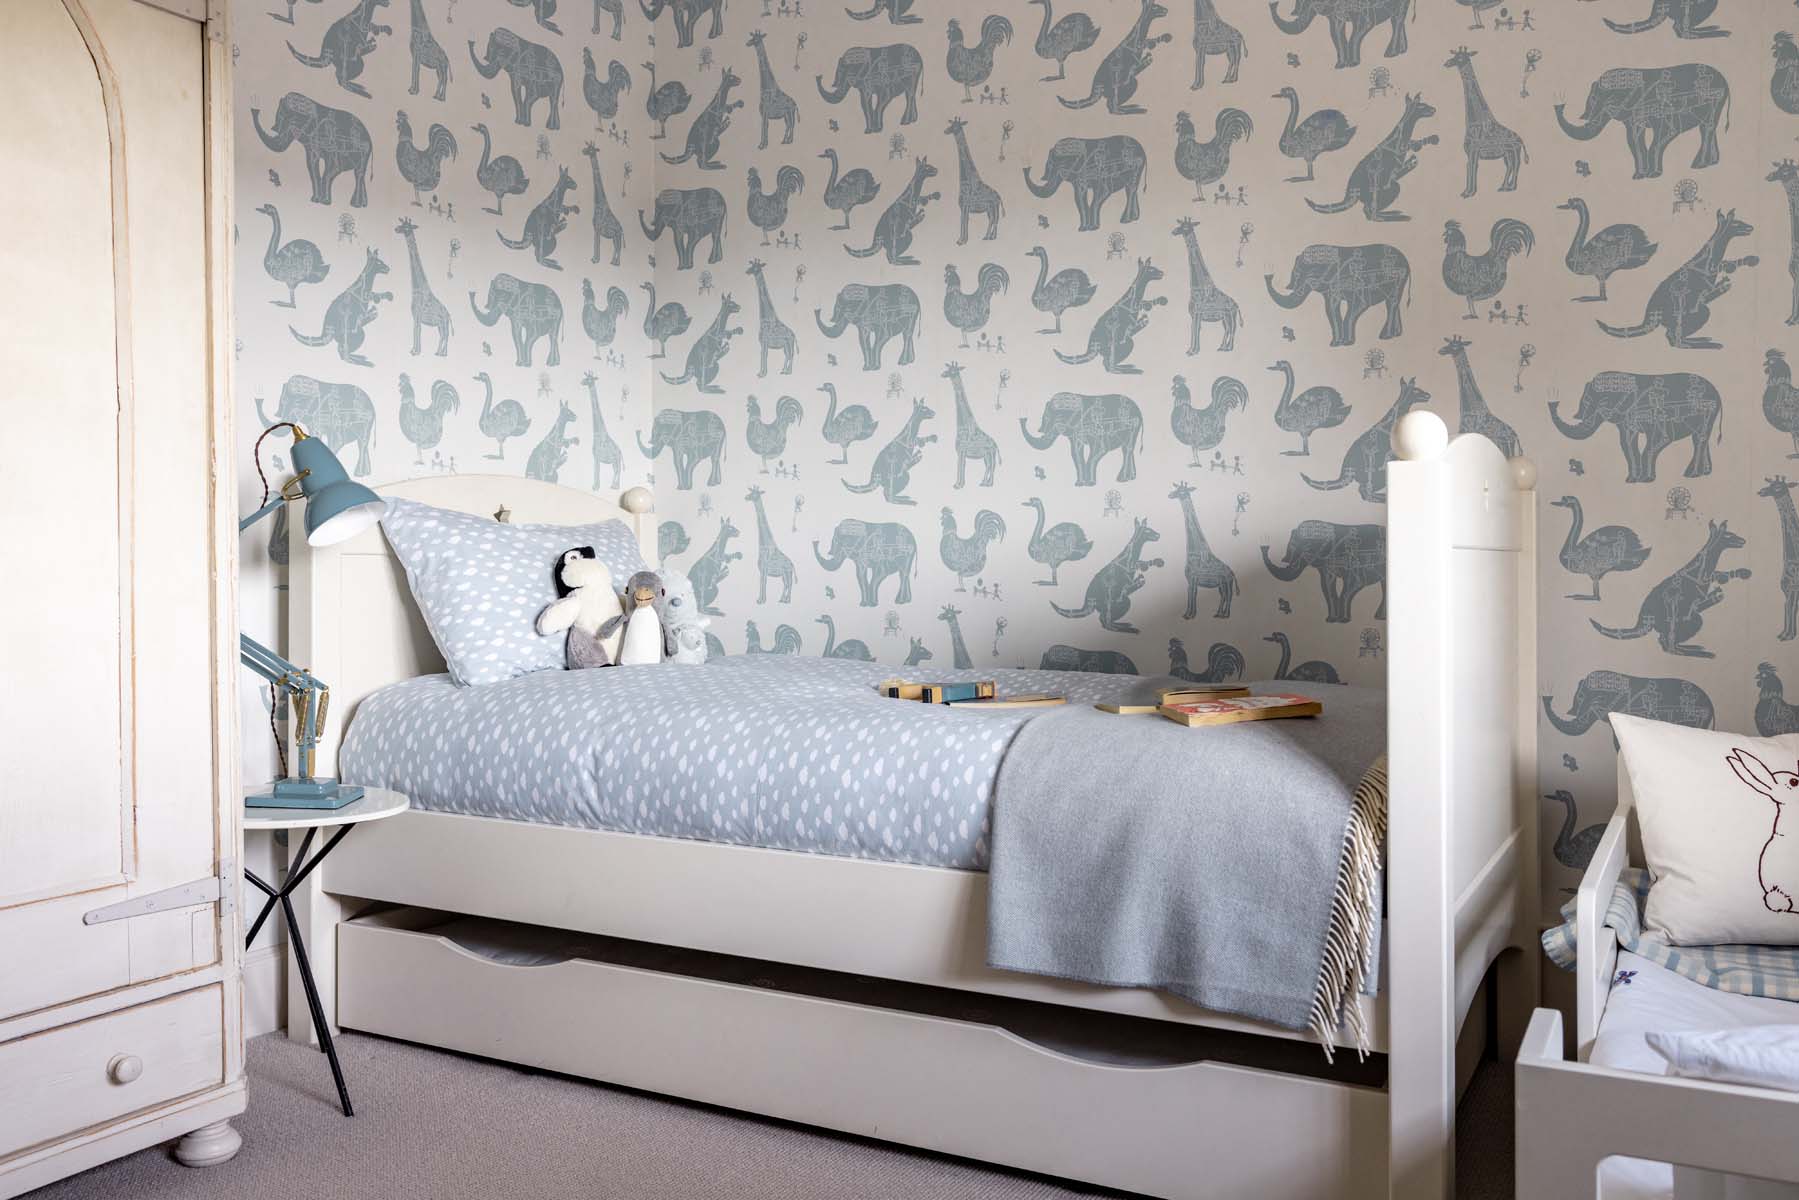 Children's bedroom with patterned wallpaper